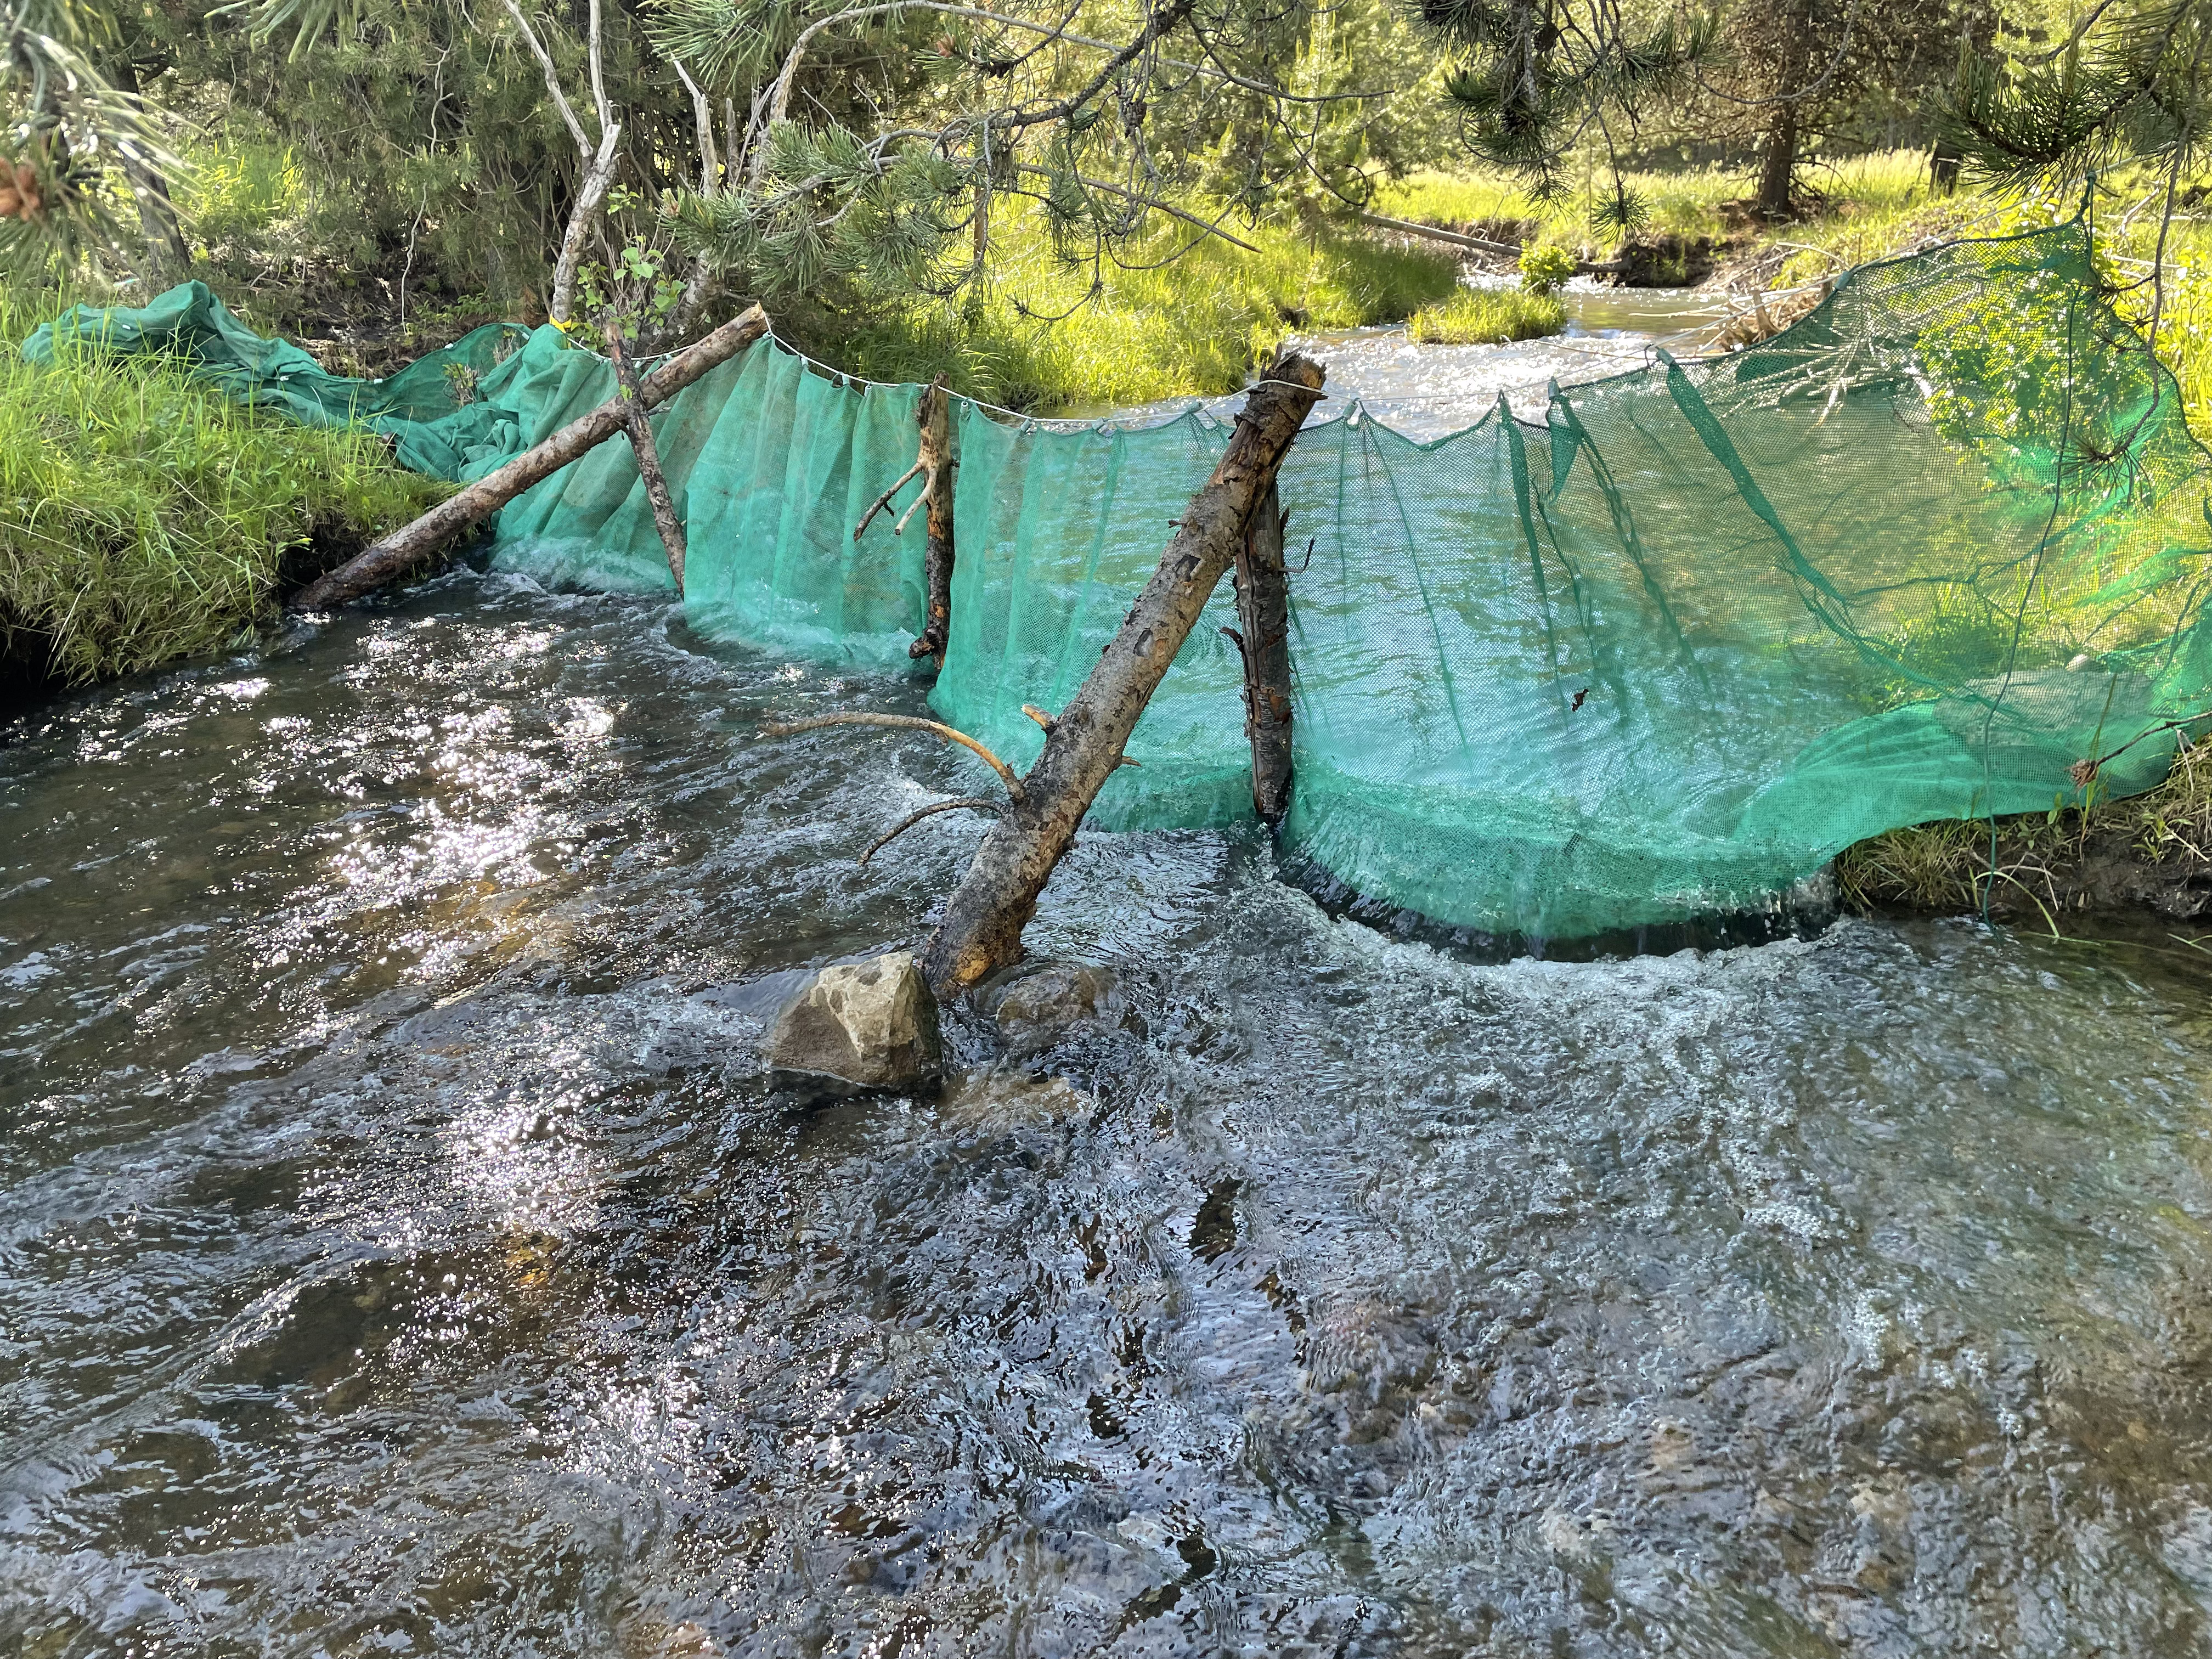 A block net – used to keep fish out of the work area.